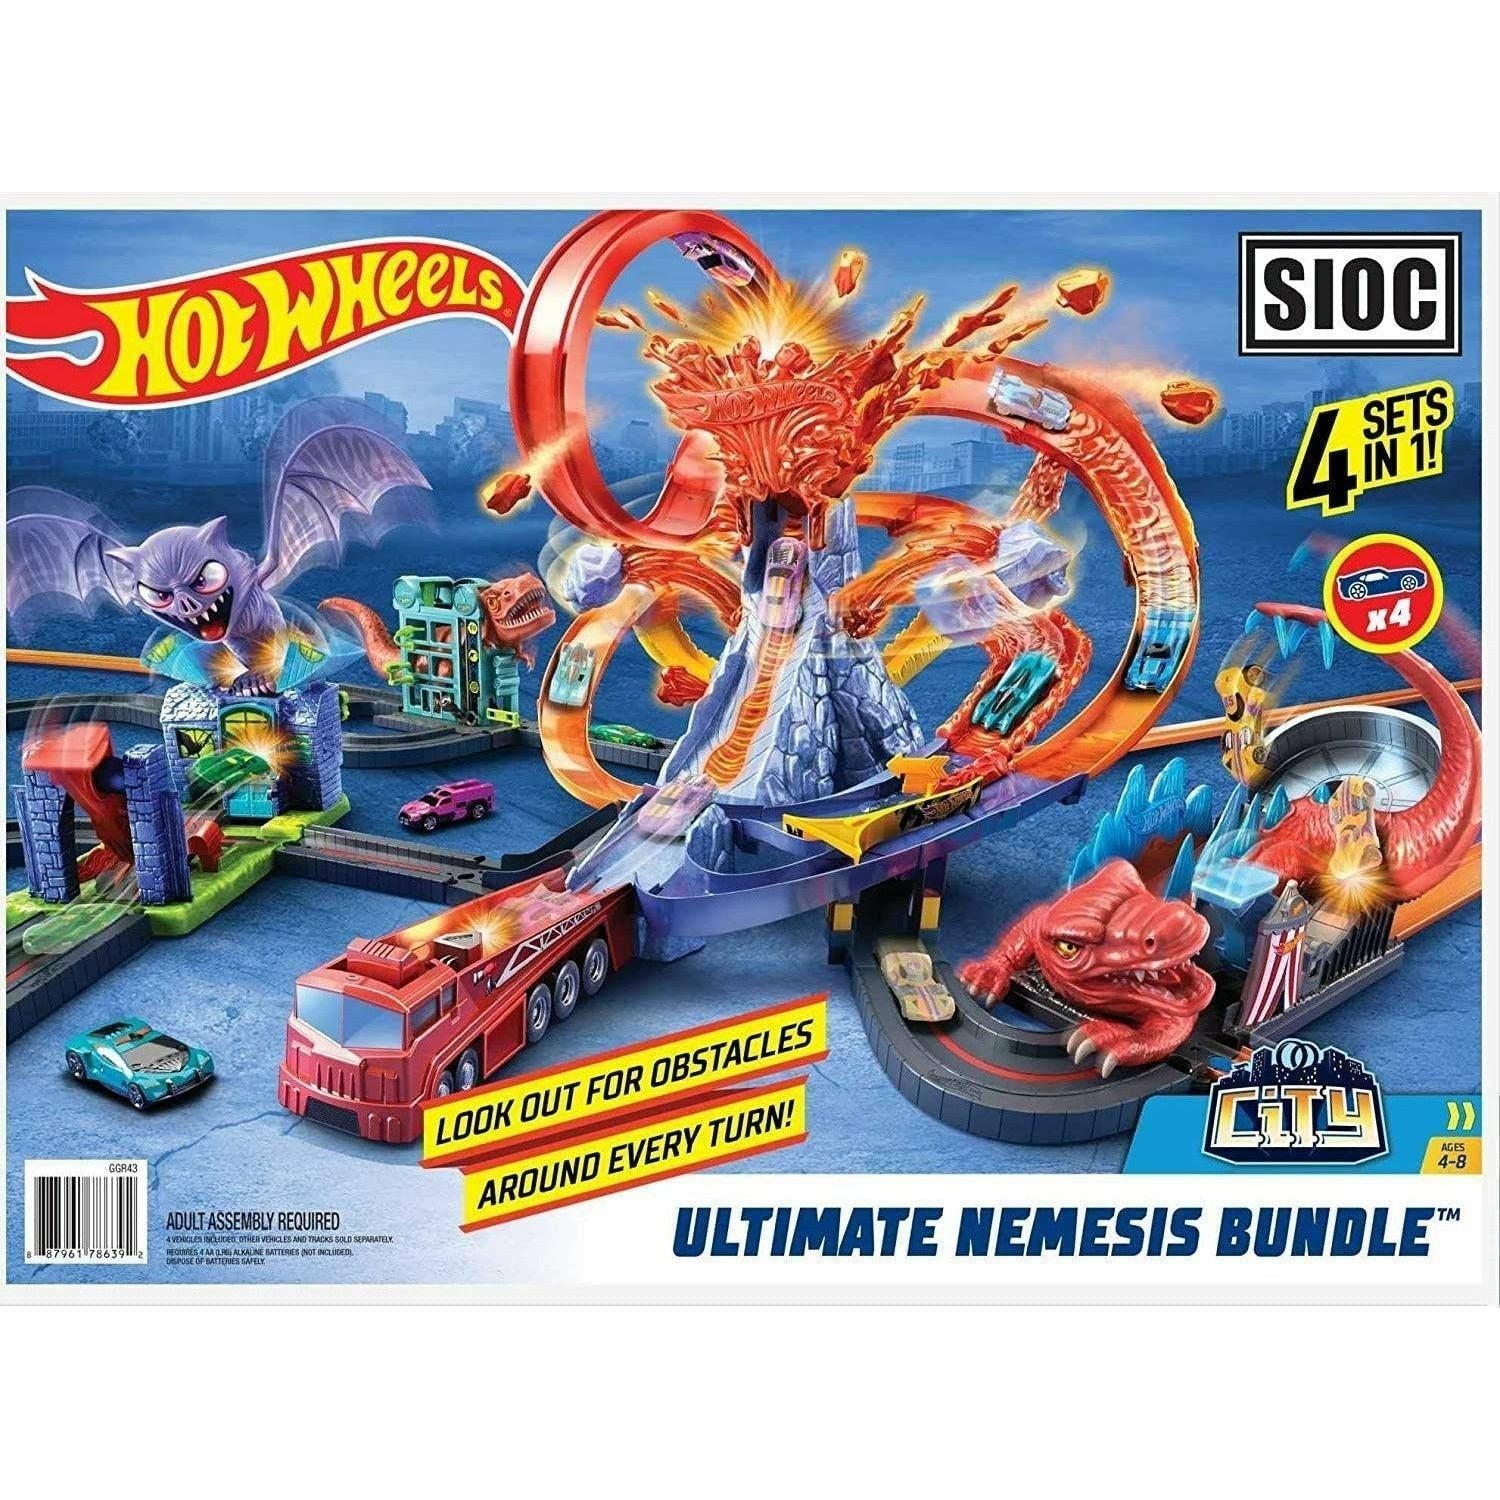 Hot Wheels Ultimate City Track Includes 4 Different Sets With Dinosaurs & Creatures Four 1:64 Scale Cars & Extra Track - BumbleToys - 5-7 Years, Boys, OXE, Tracks & Garages